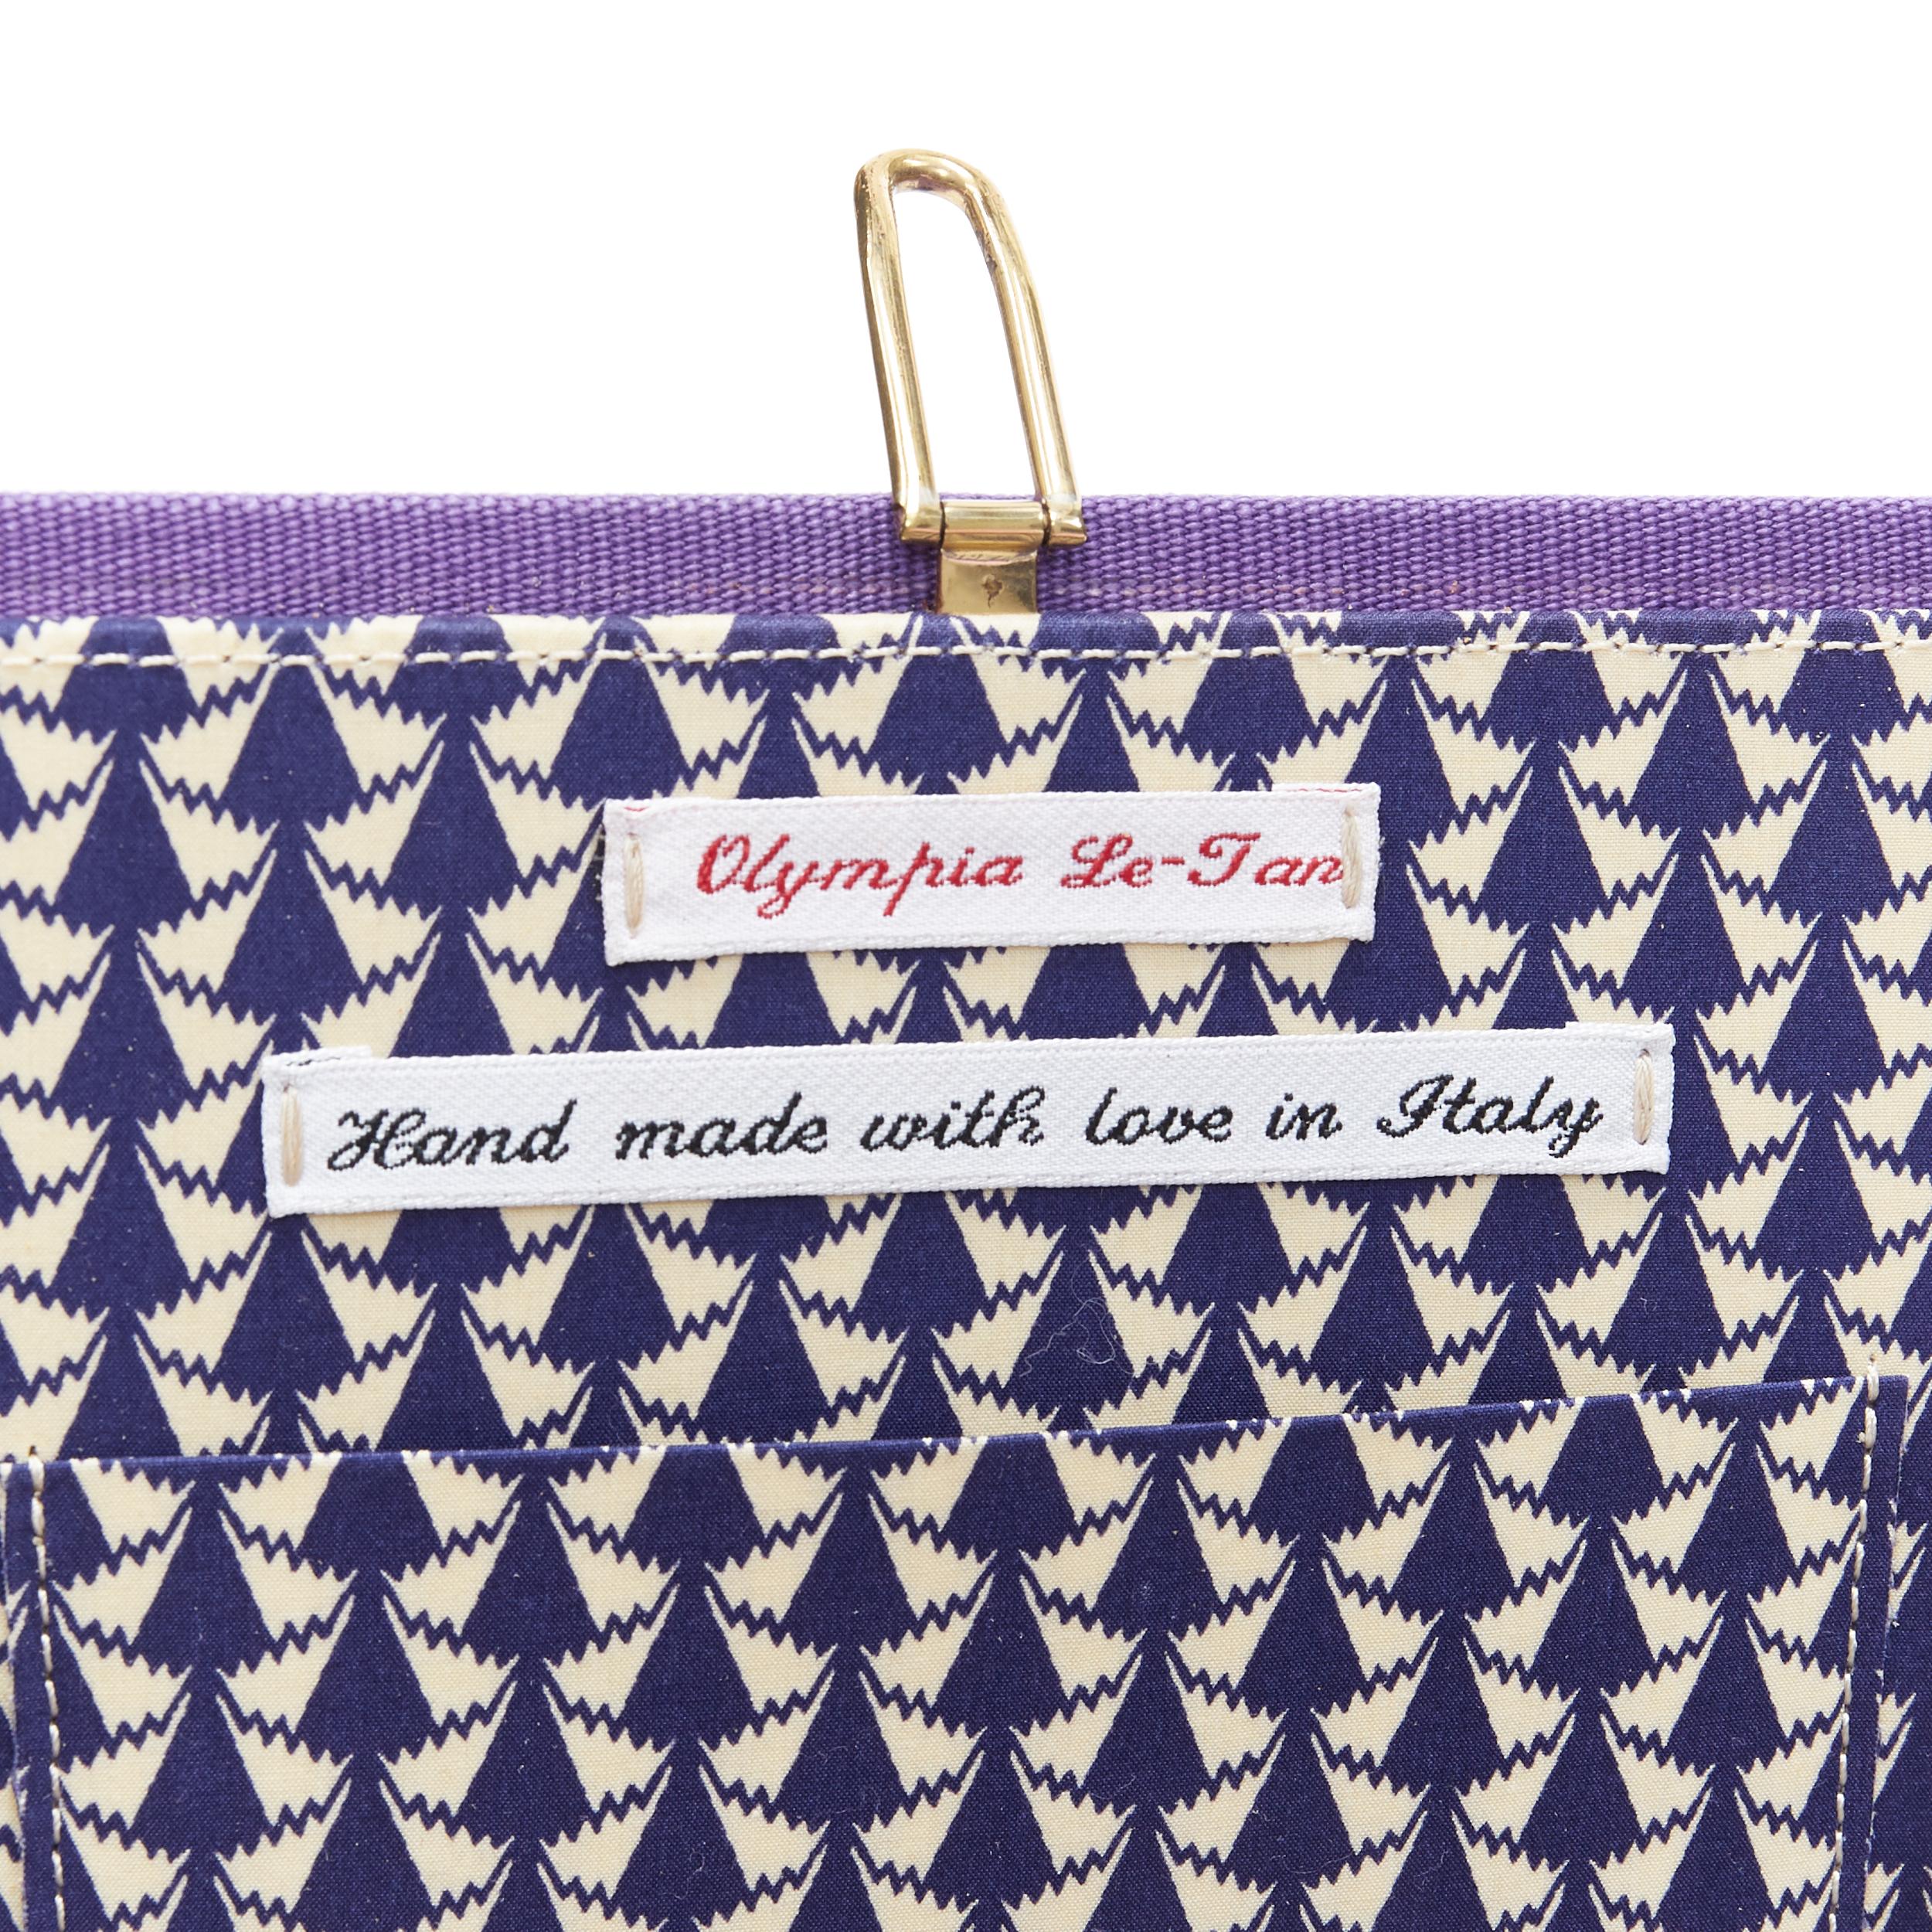 OLYMPIA LE TAN The Magician Bruno Frank purple embroidery book clutch bag 4